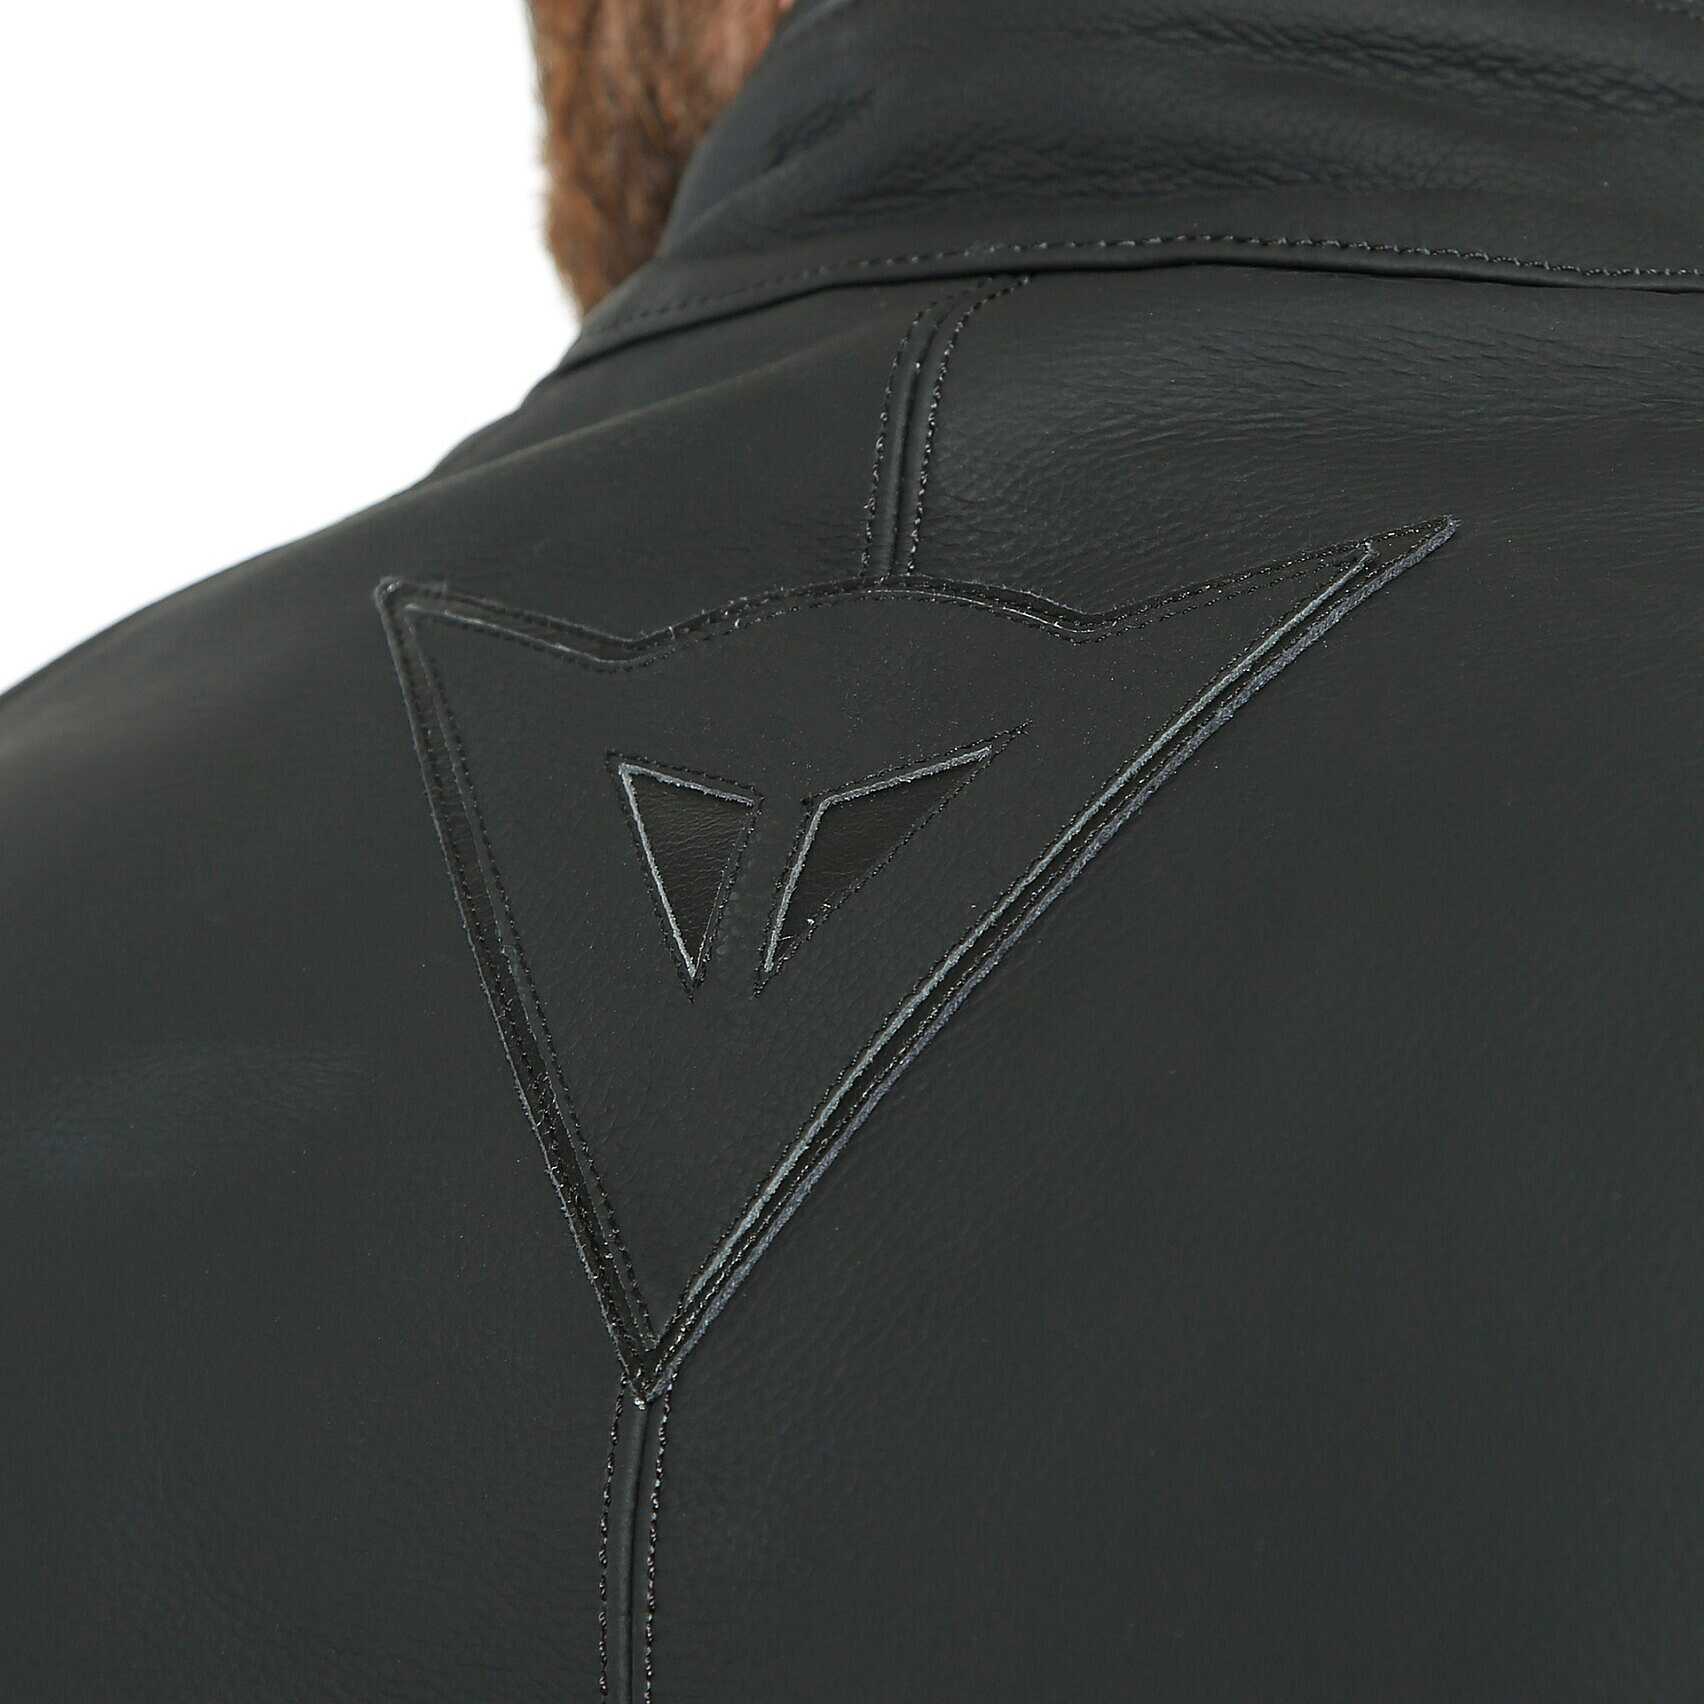 Dainese Rapida Lady Leather Jacket Review [Perf For Summer]